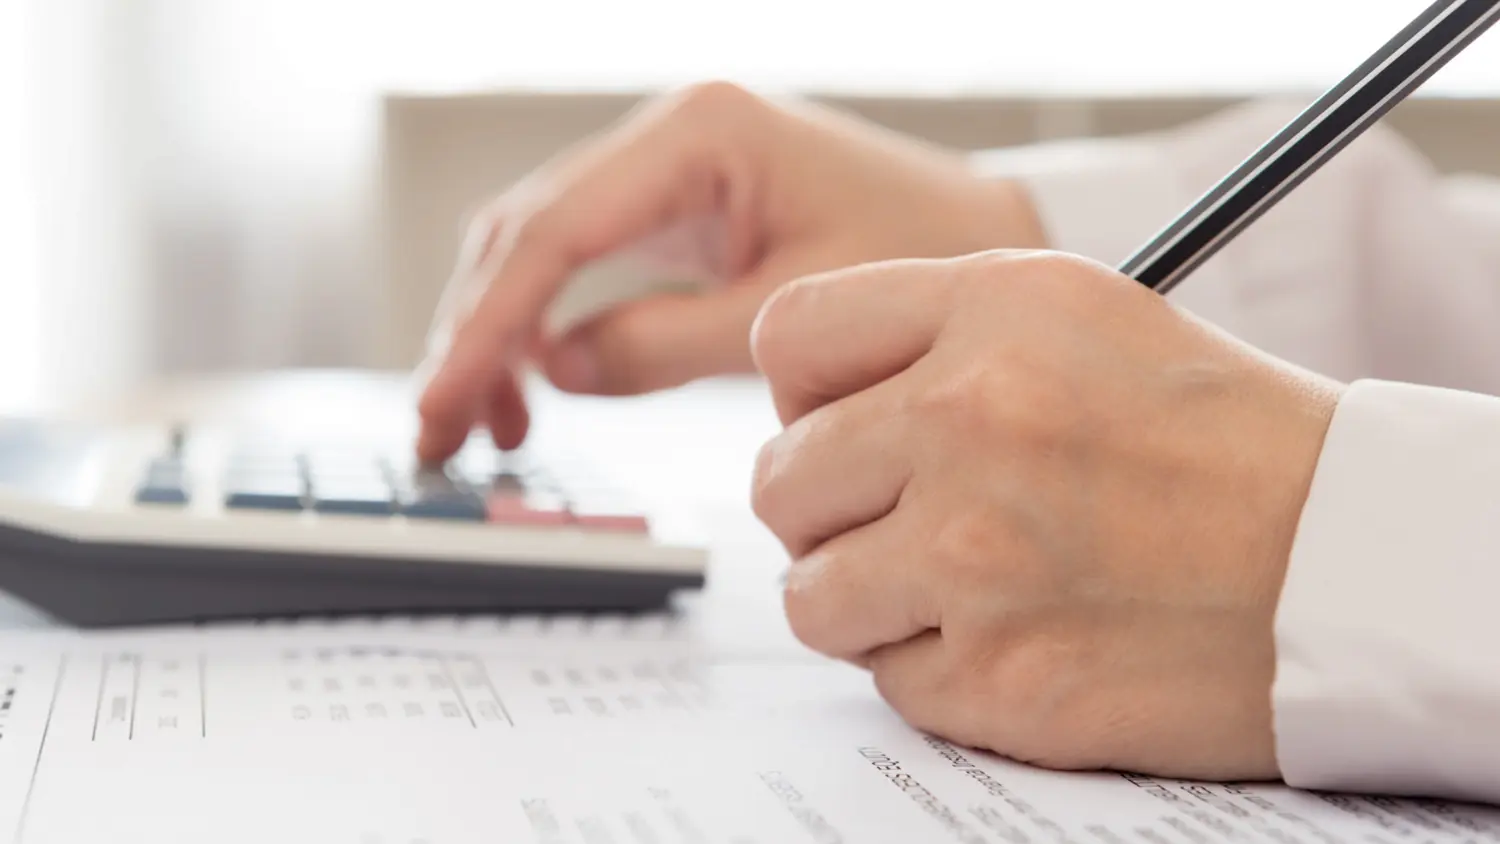 Five Reasons Bookkeeping for Contractors Should Never Be an Afterthought